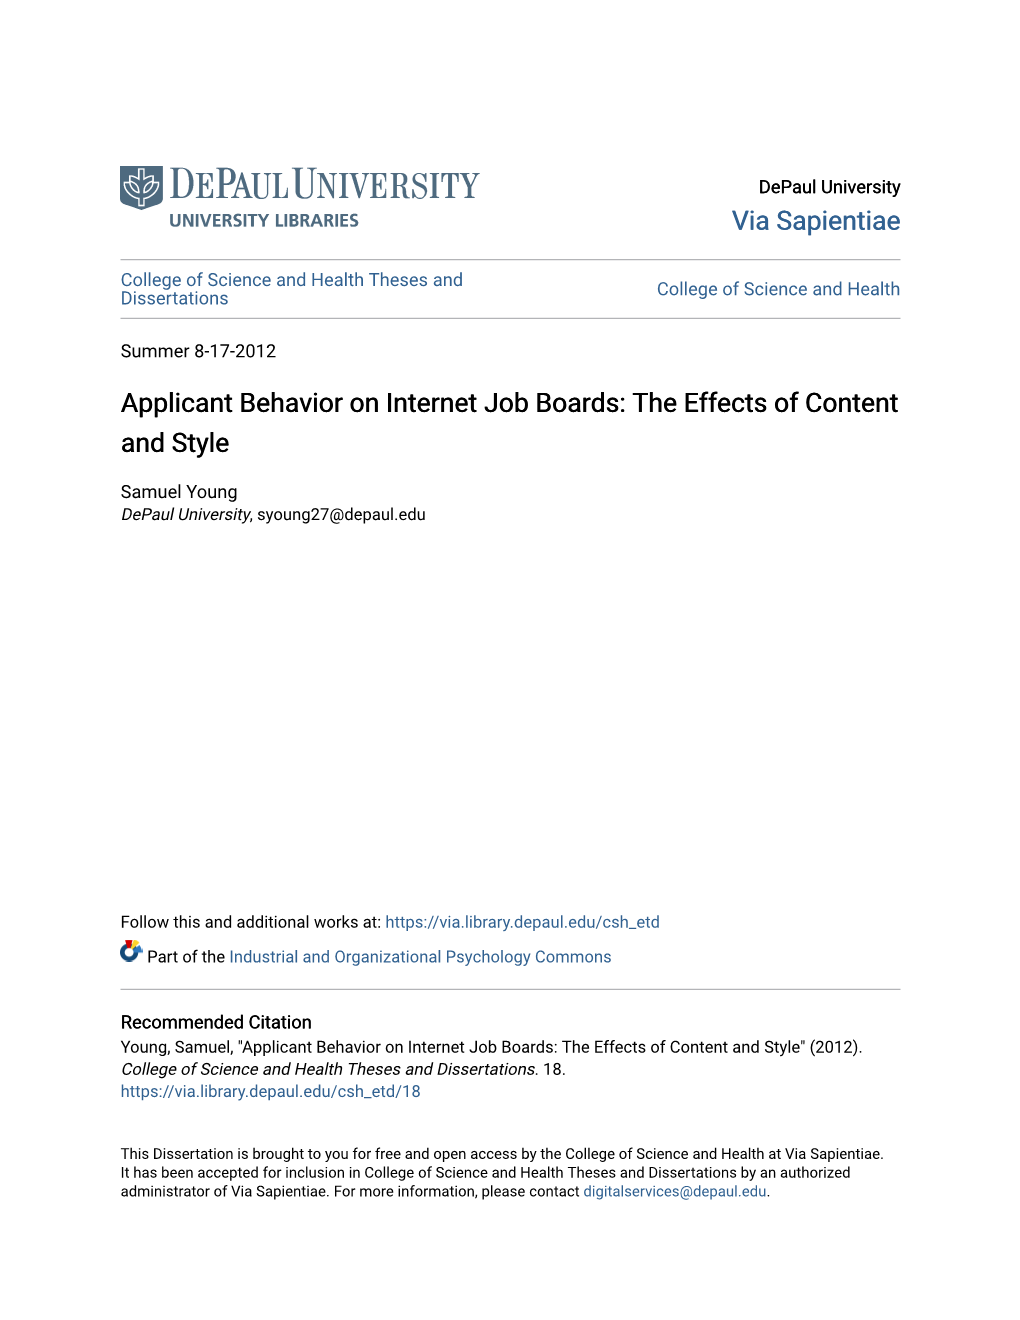 Applicant Behavior on Internet Job Boards: the Effects of Content and Style